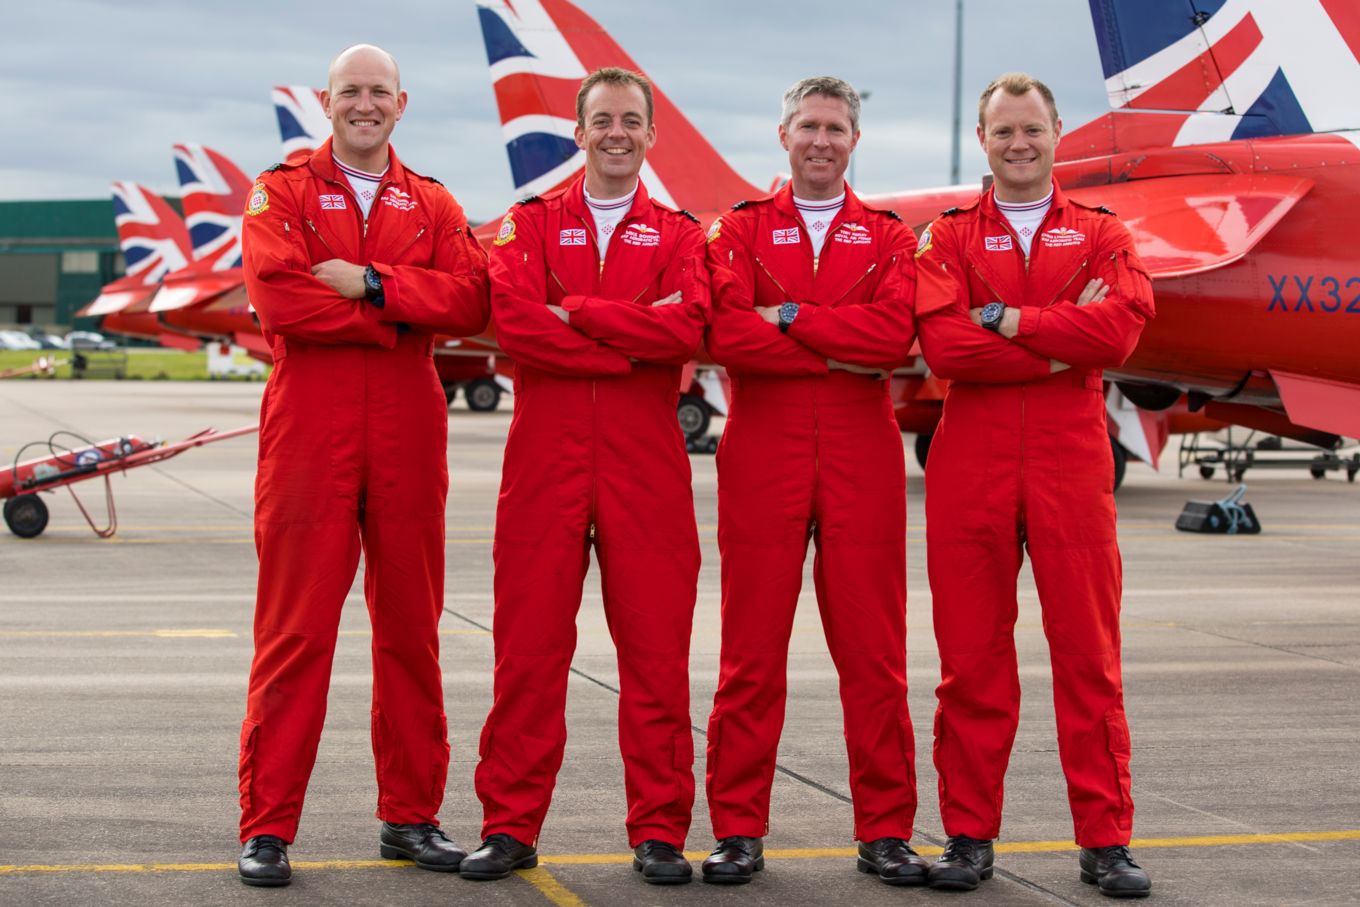 The four pilots leaving the Red Arrows after the 2019 season.